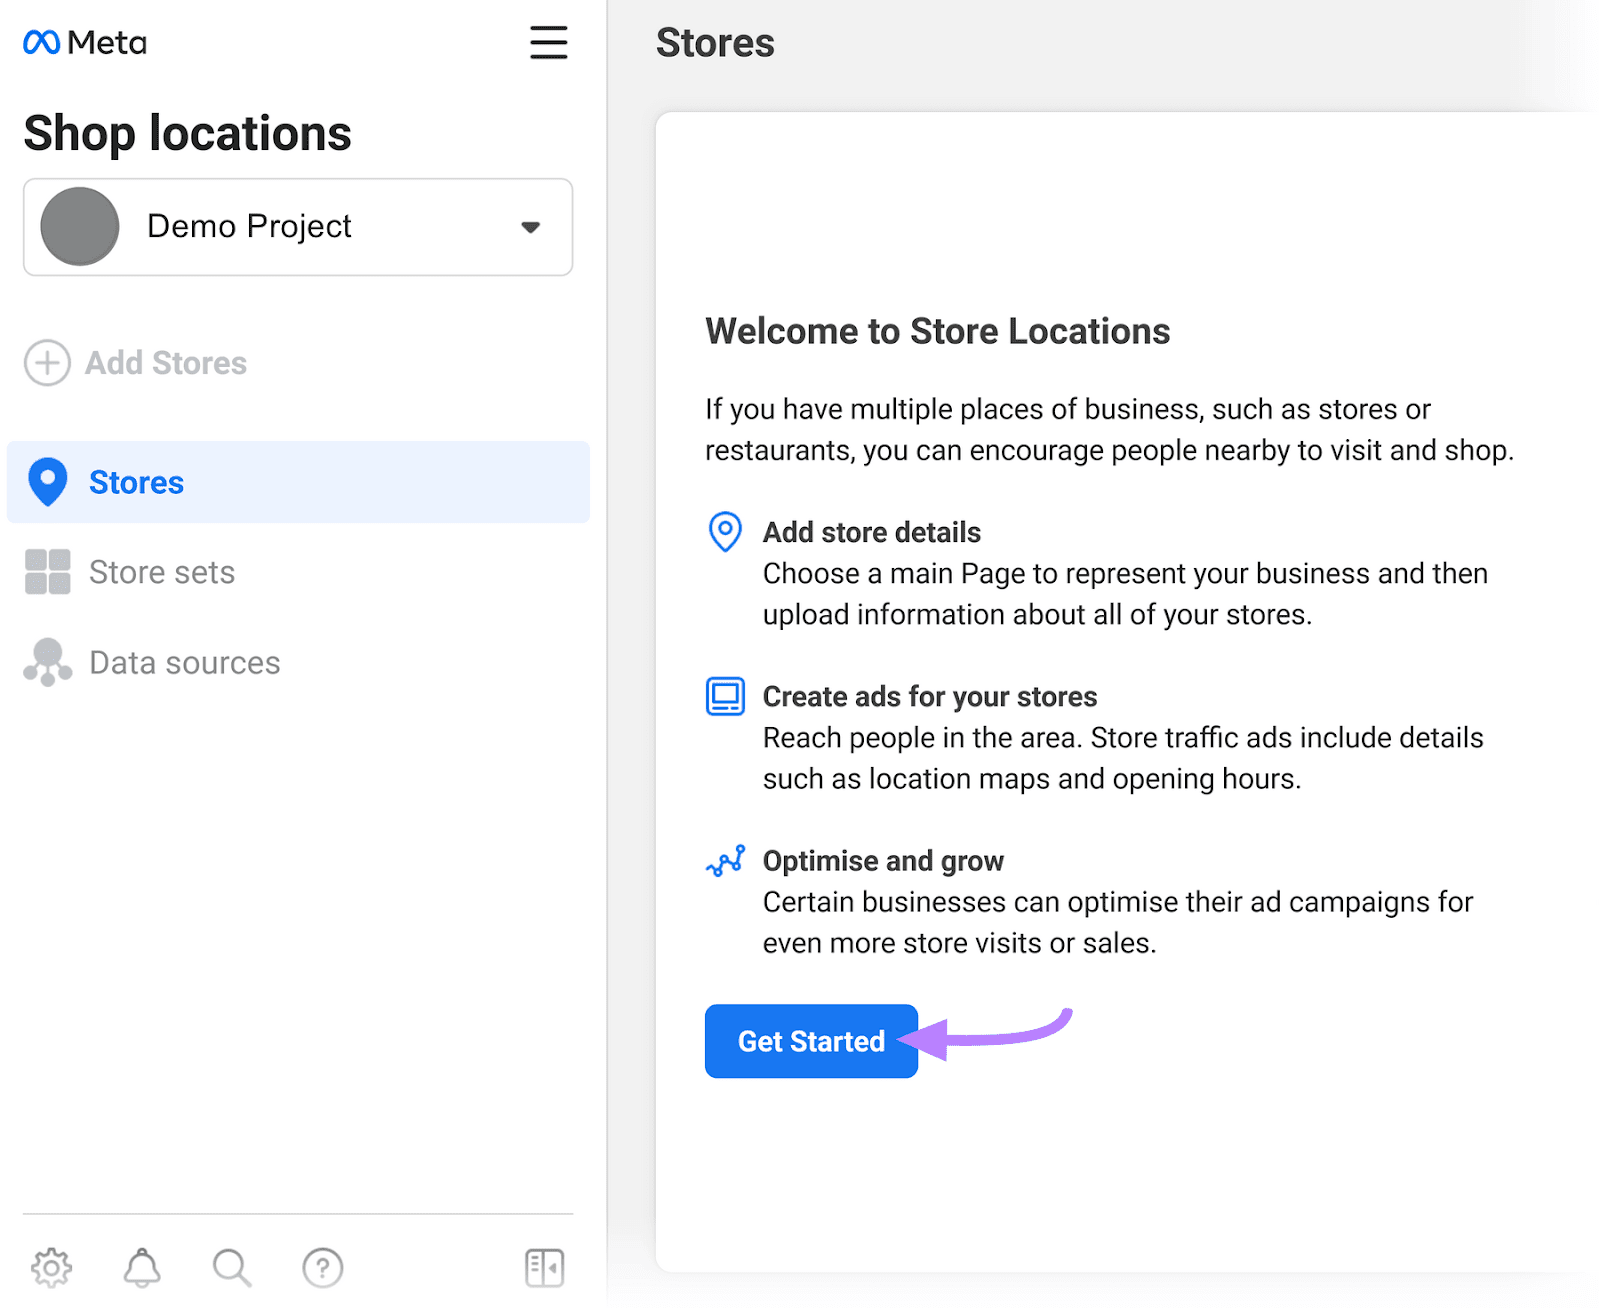 “Get Started" button selected on the Store Locations page